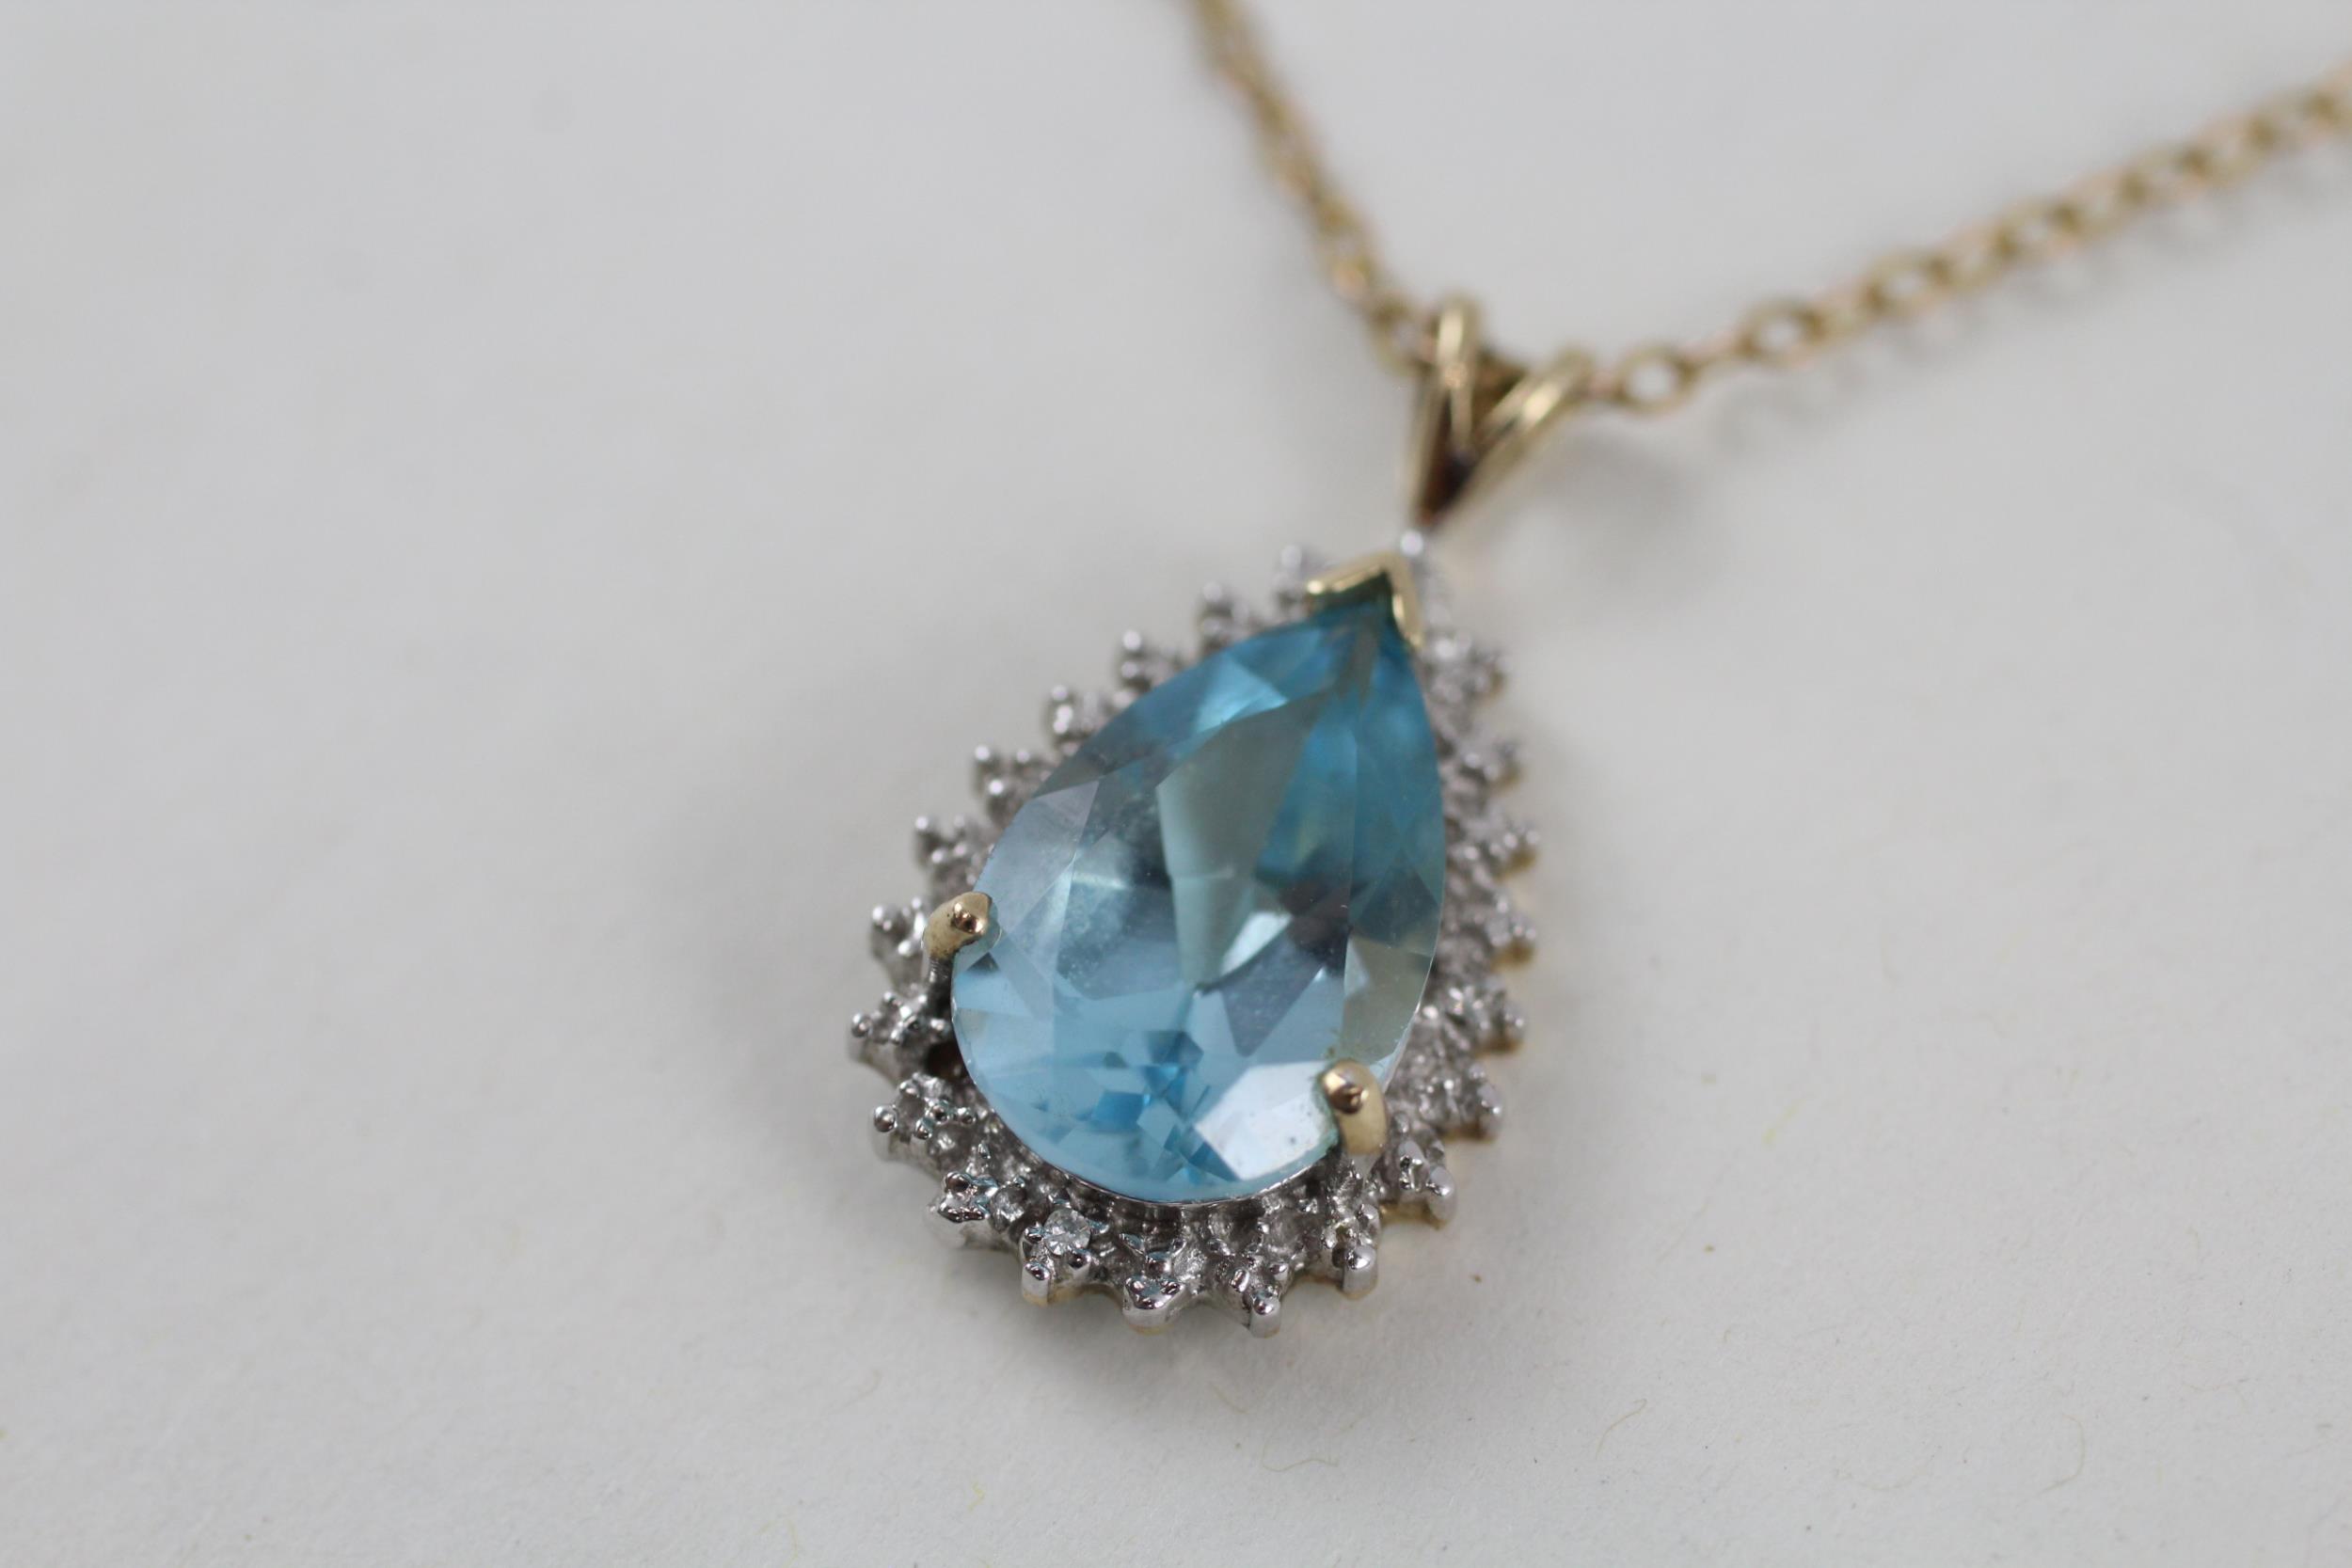 9ct gold pear cut blue topaz & diamond cluster pendant necklace (3.8g) - Image 2 of 6